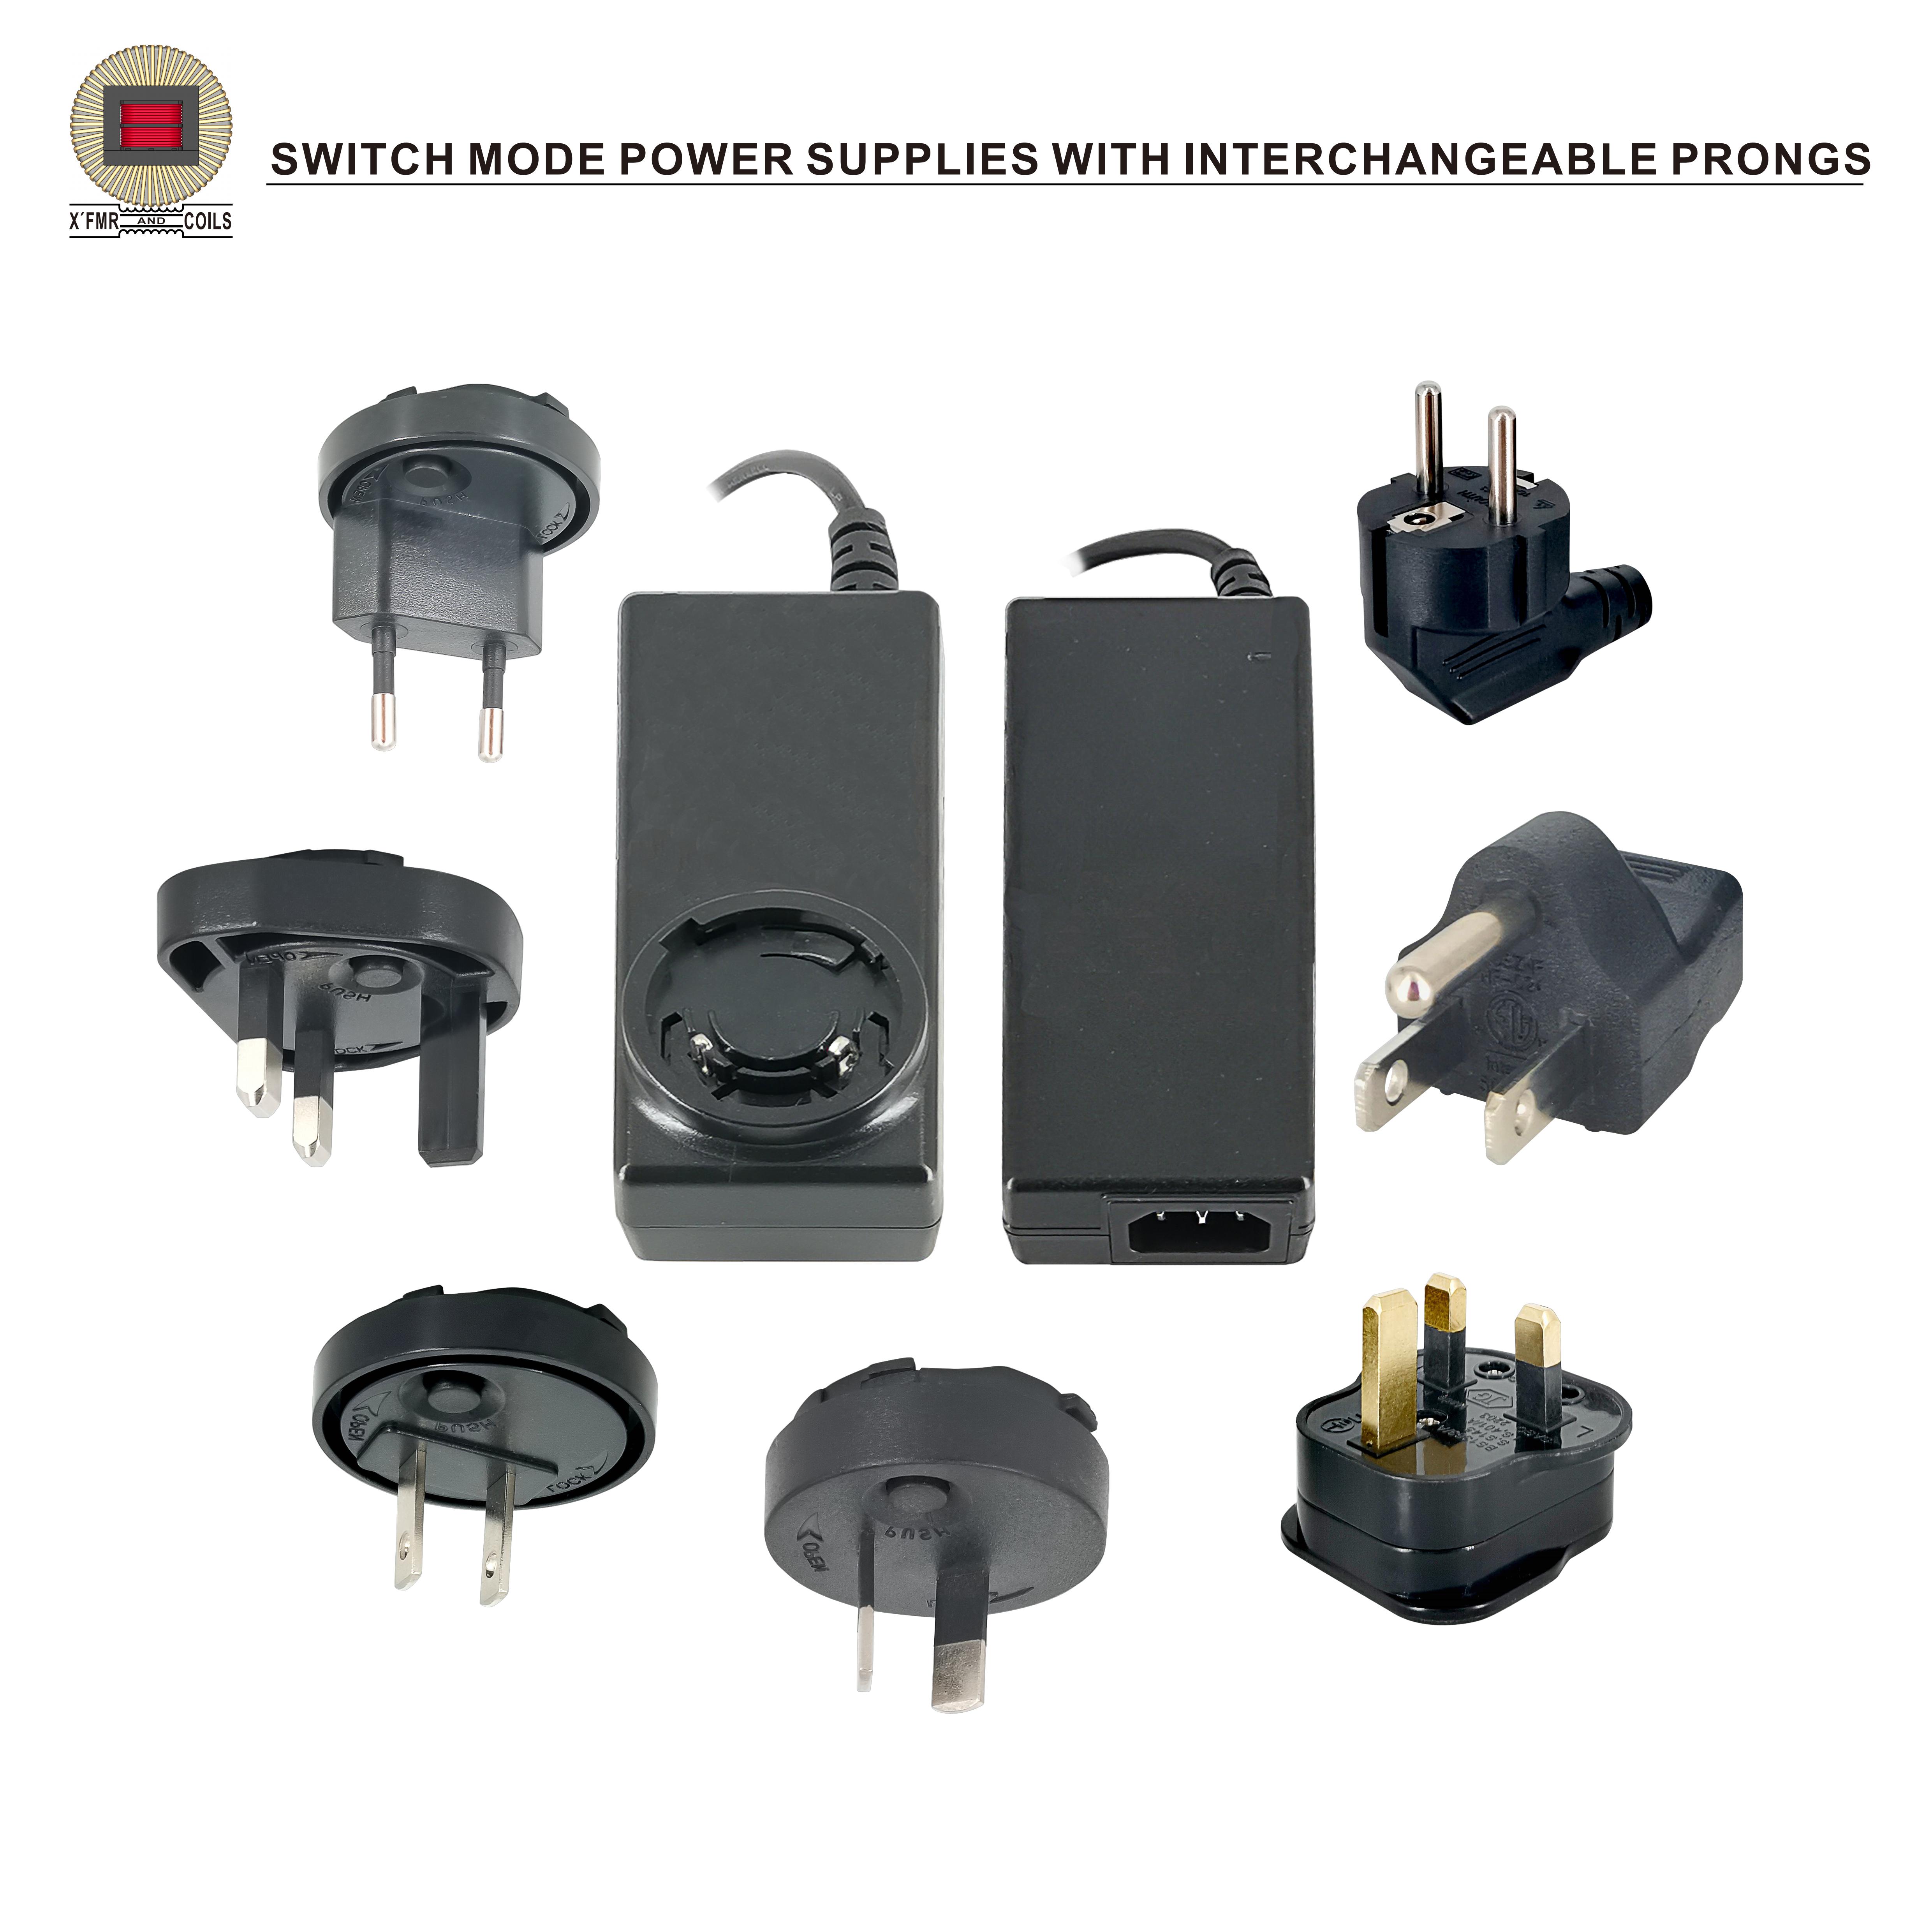 Switch Mode Power Supplies with Interchangeable Prongs SPS-01 series